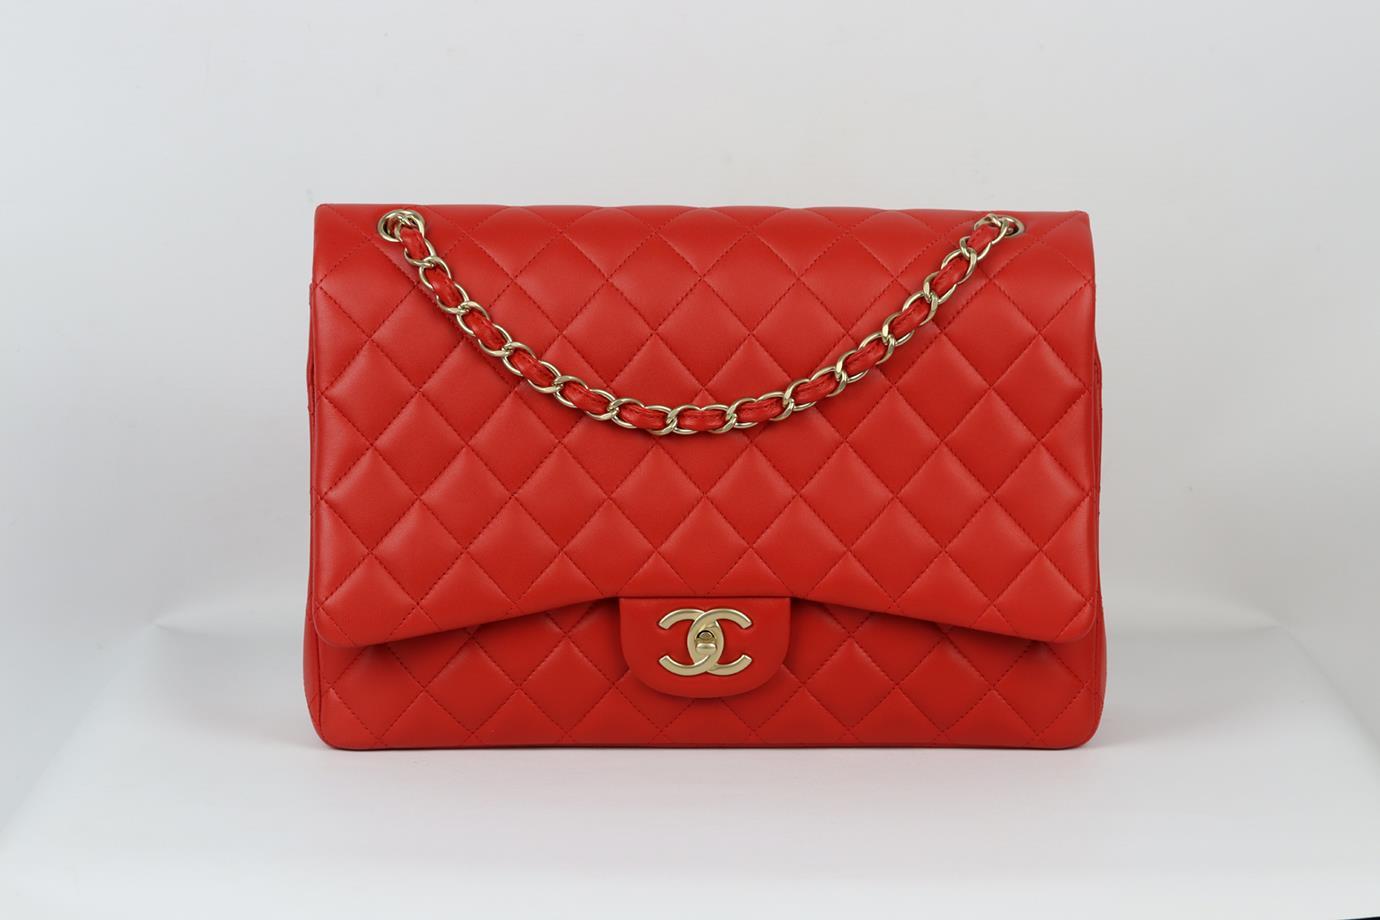 Red Chanel 2012 Maxi Classic Quilted Leather Double Flap Shoulder Bag